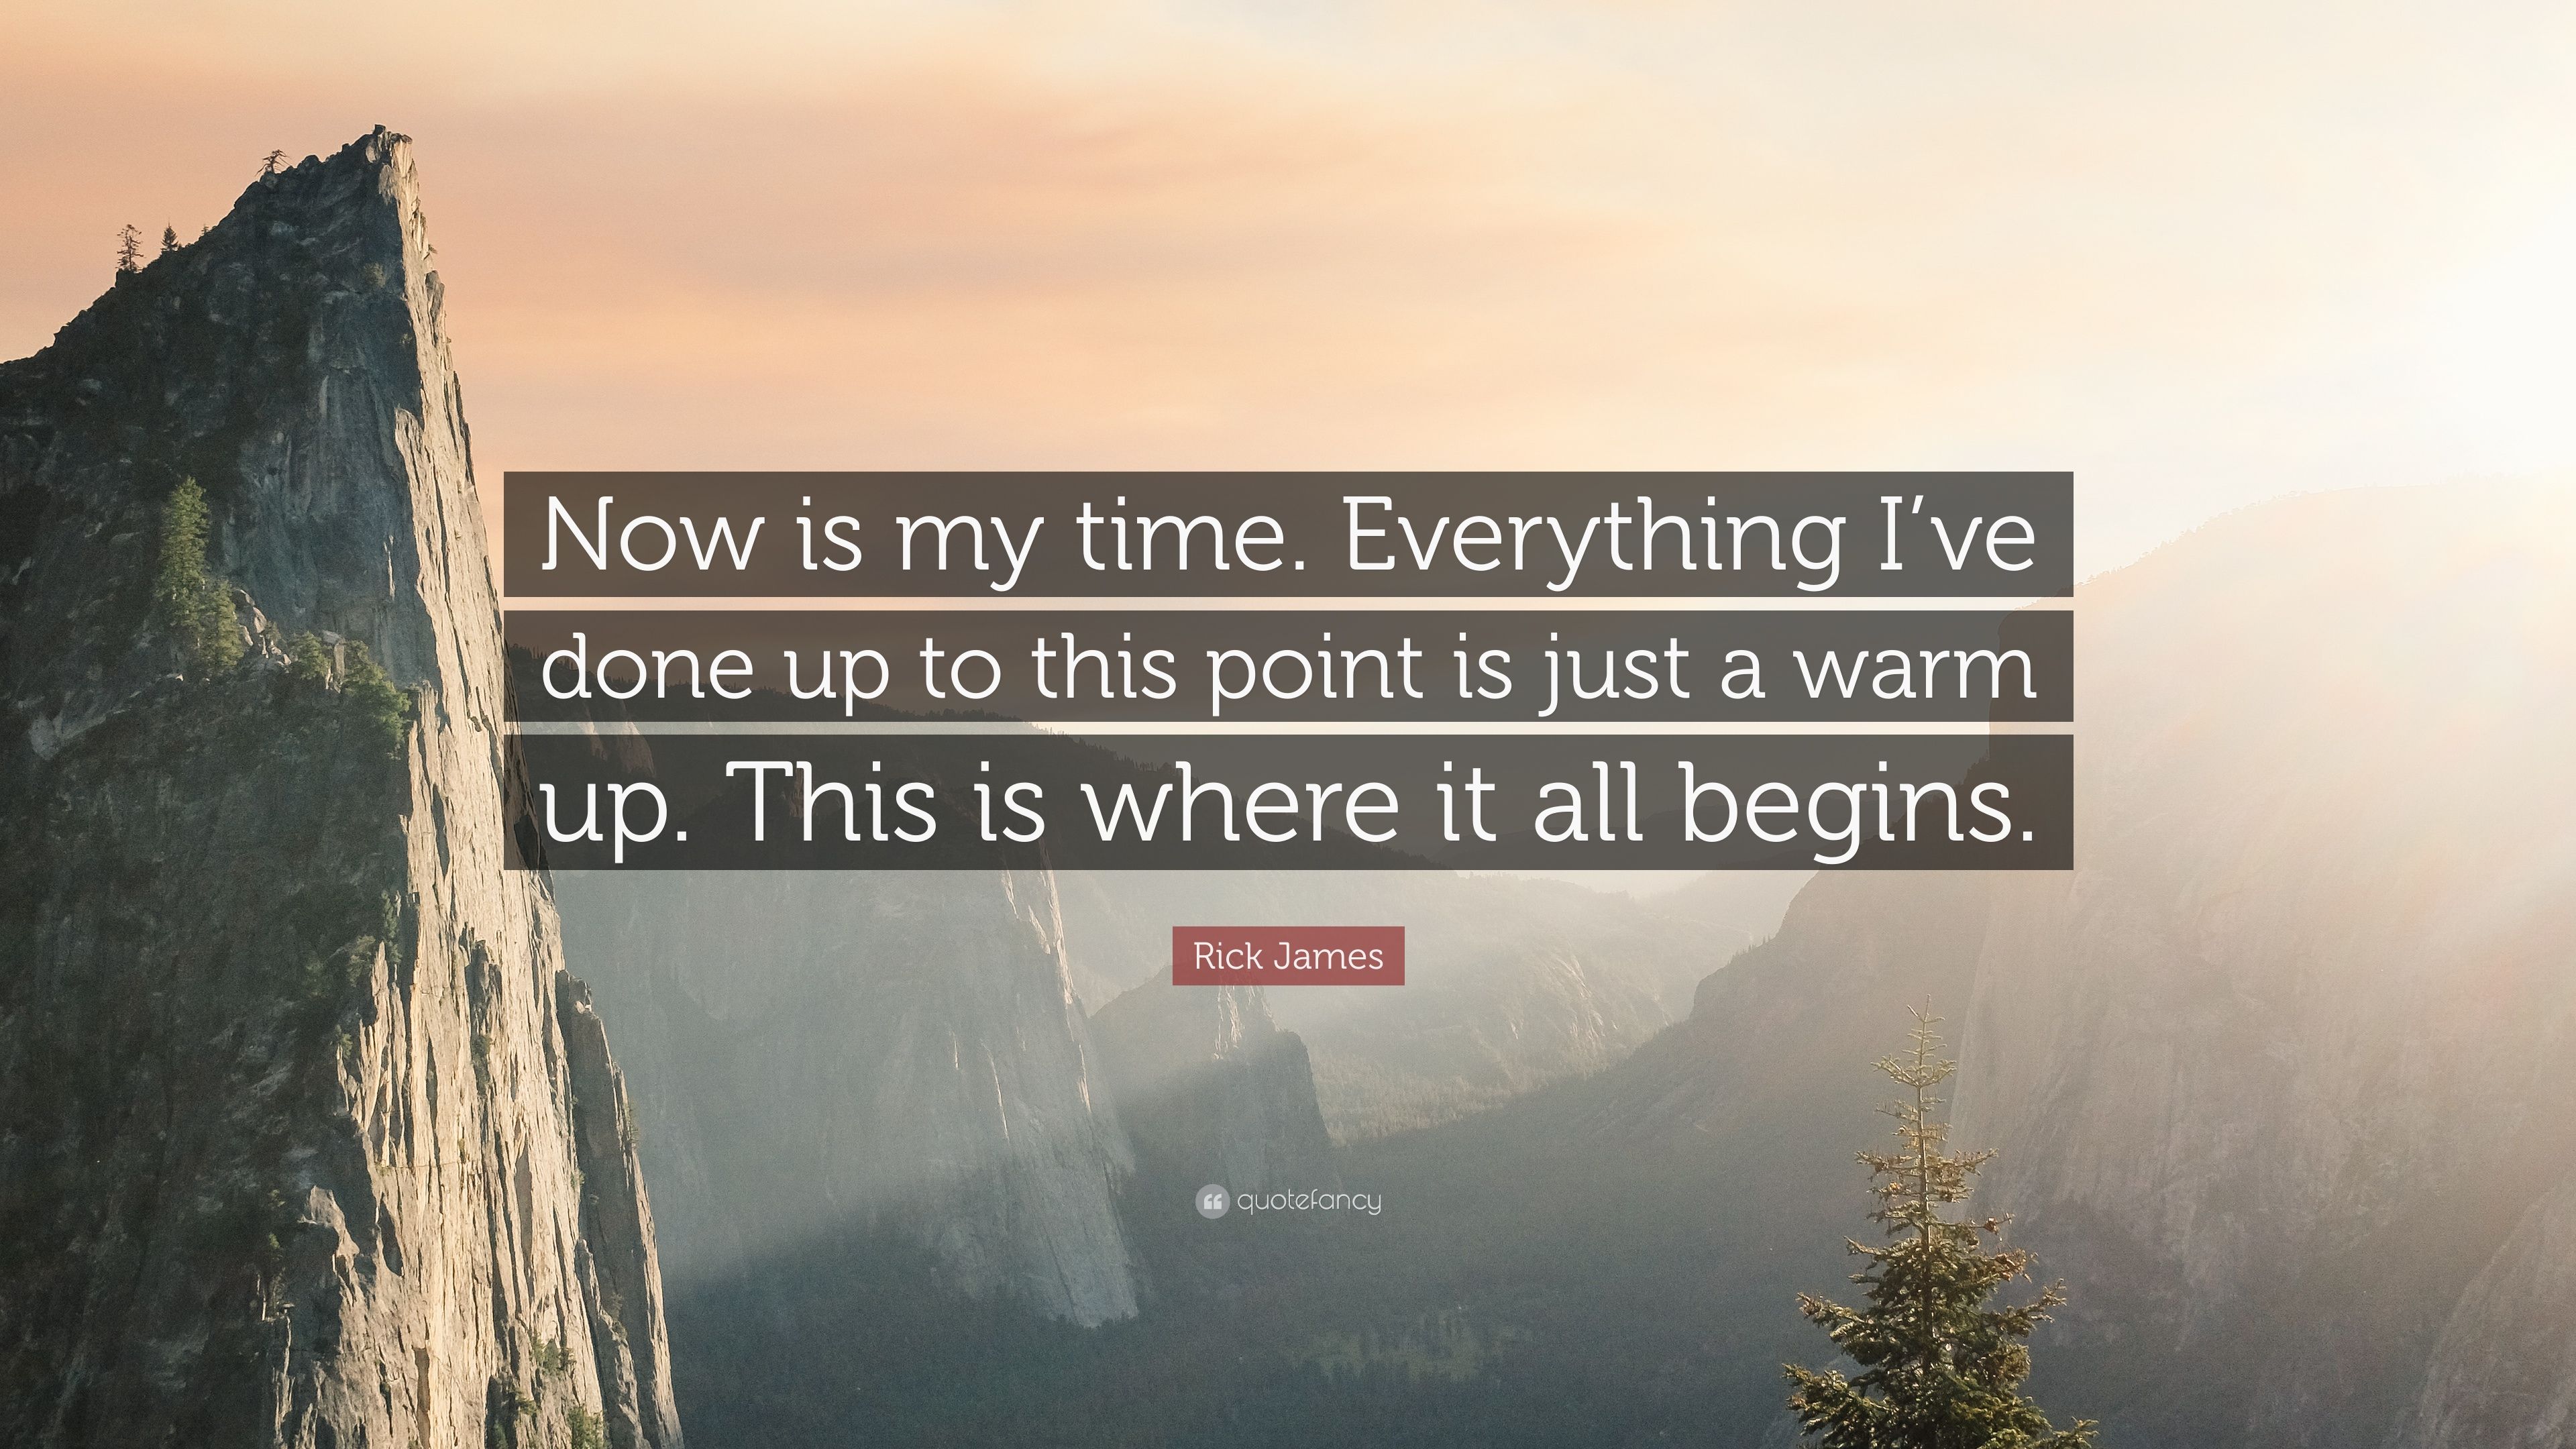 Rick James Quote: “Now is my time. Everything I've done up to this point is